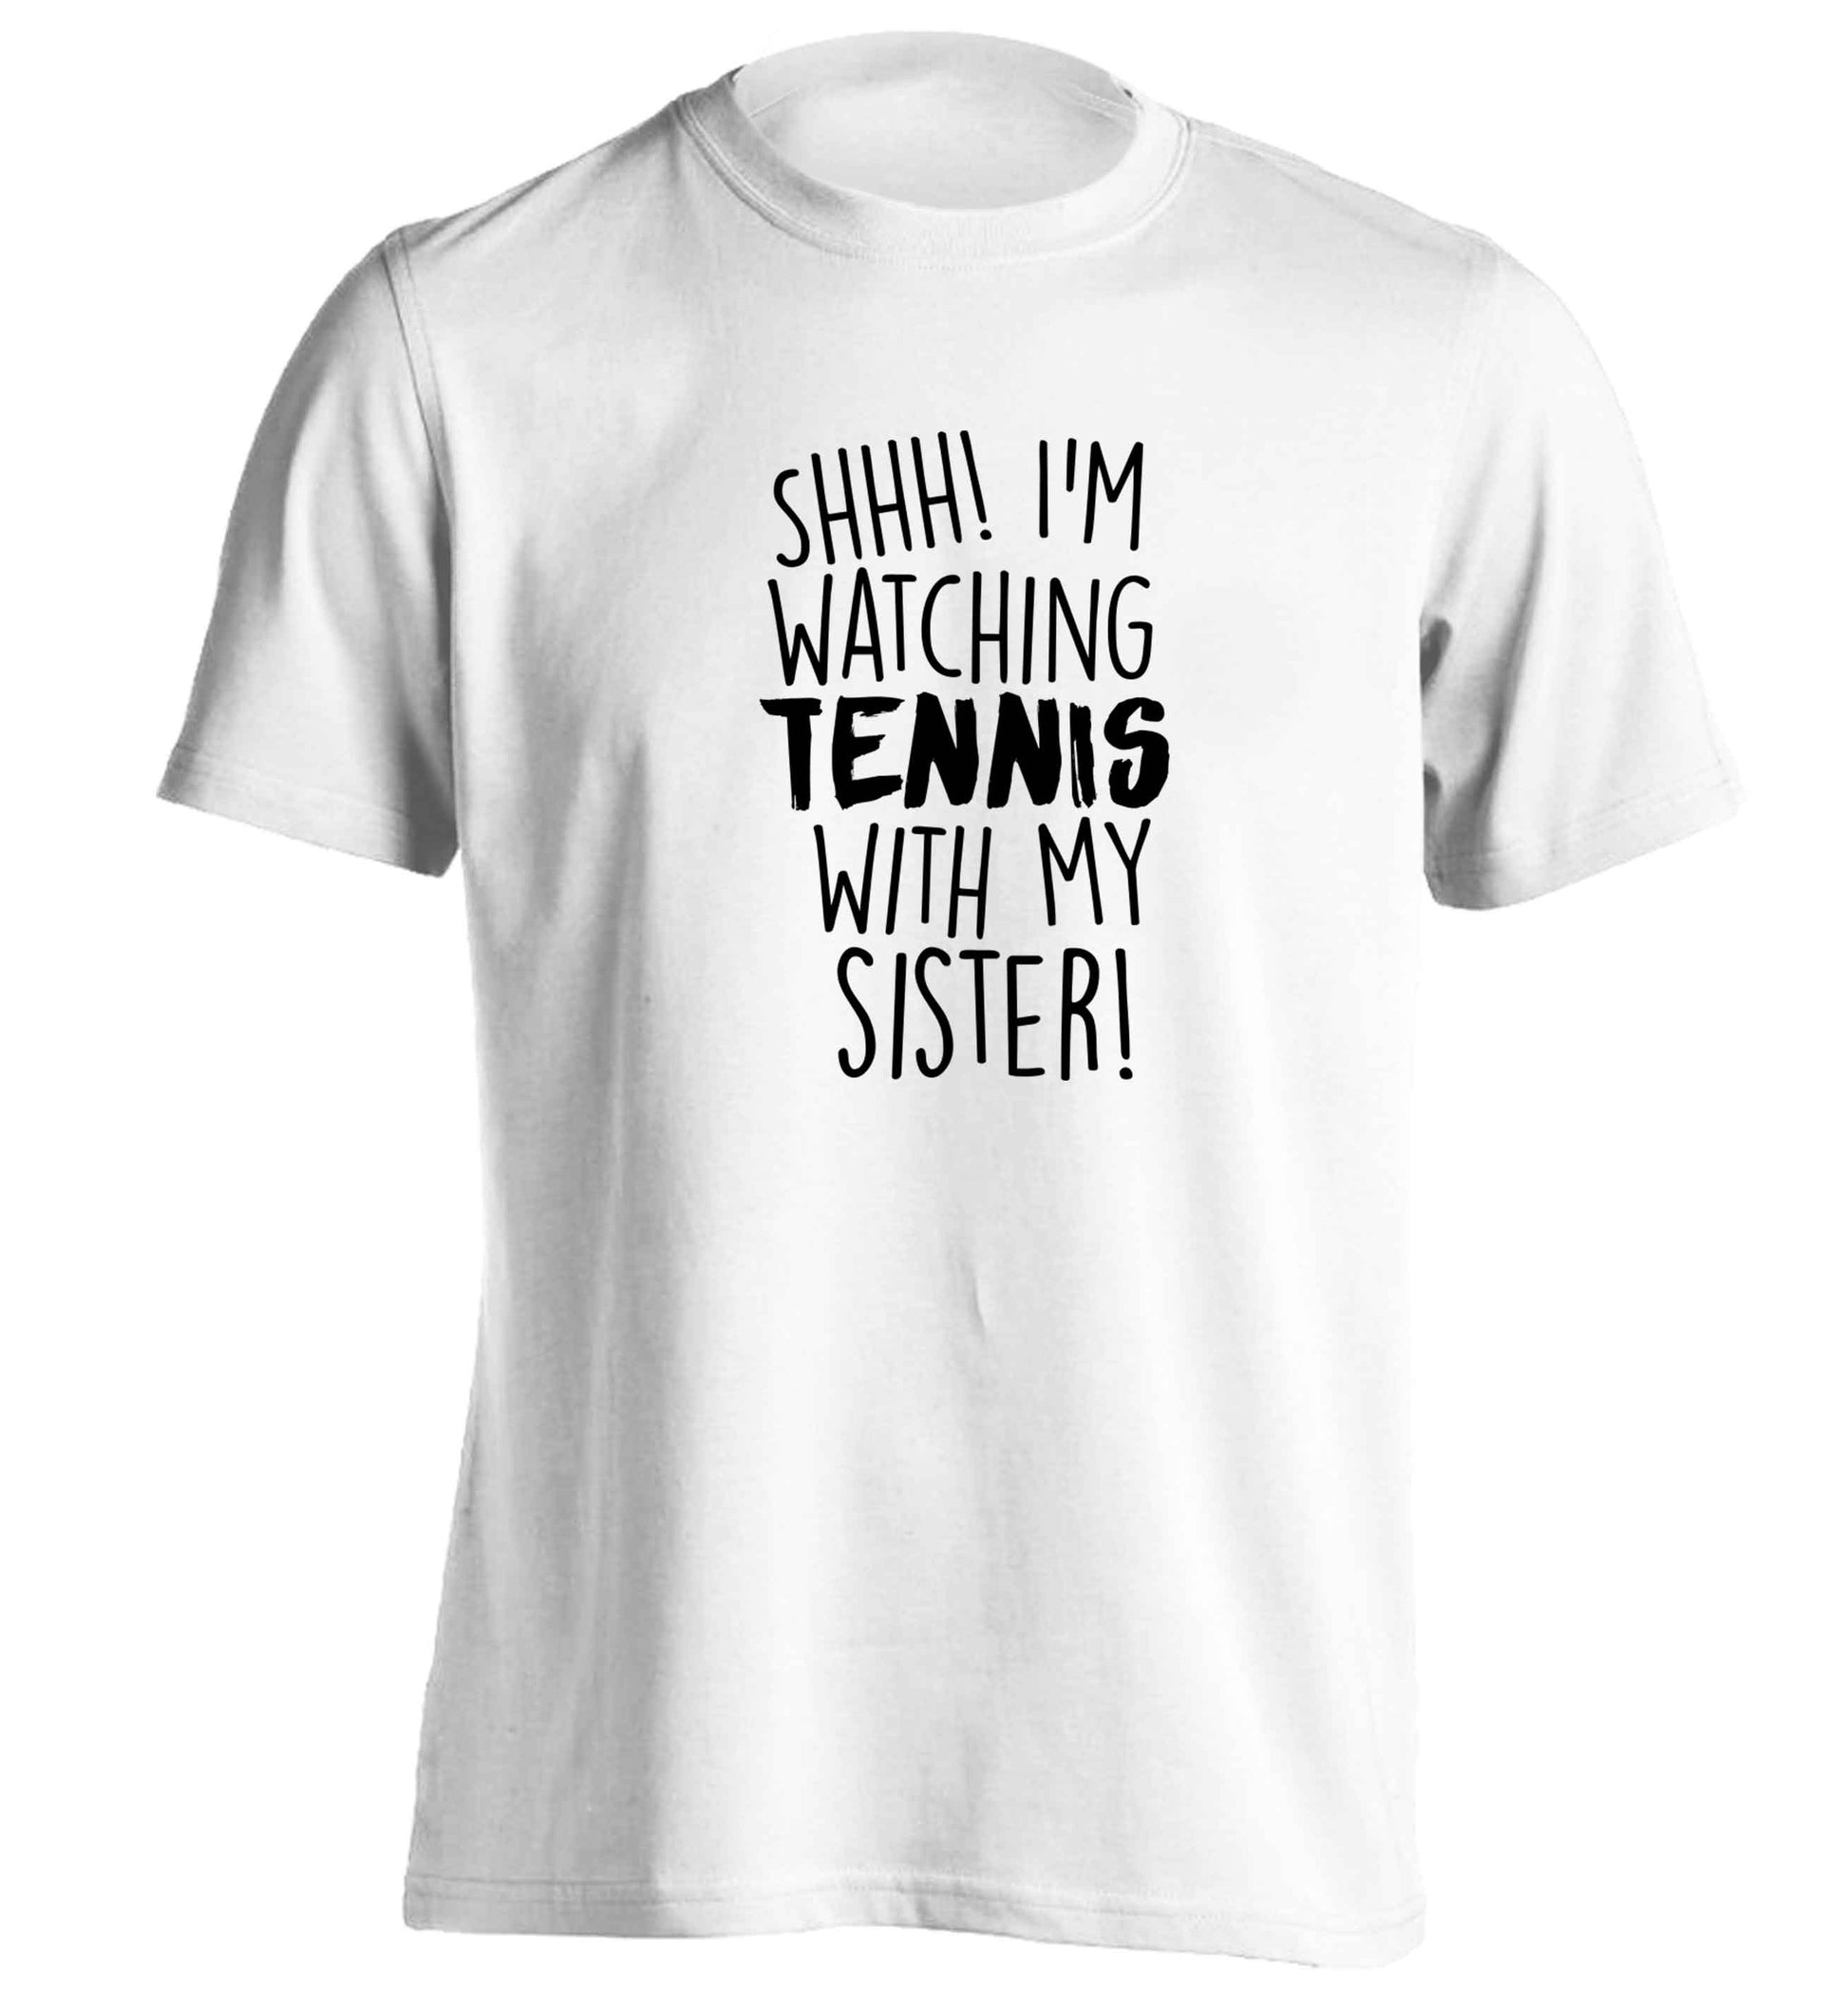 Shh! I'm watching tennis with my sister! adults unisex white Tshirt 2XL